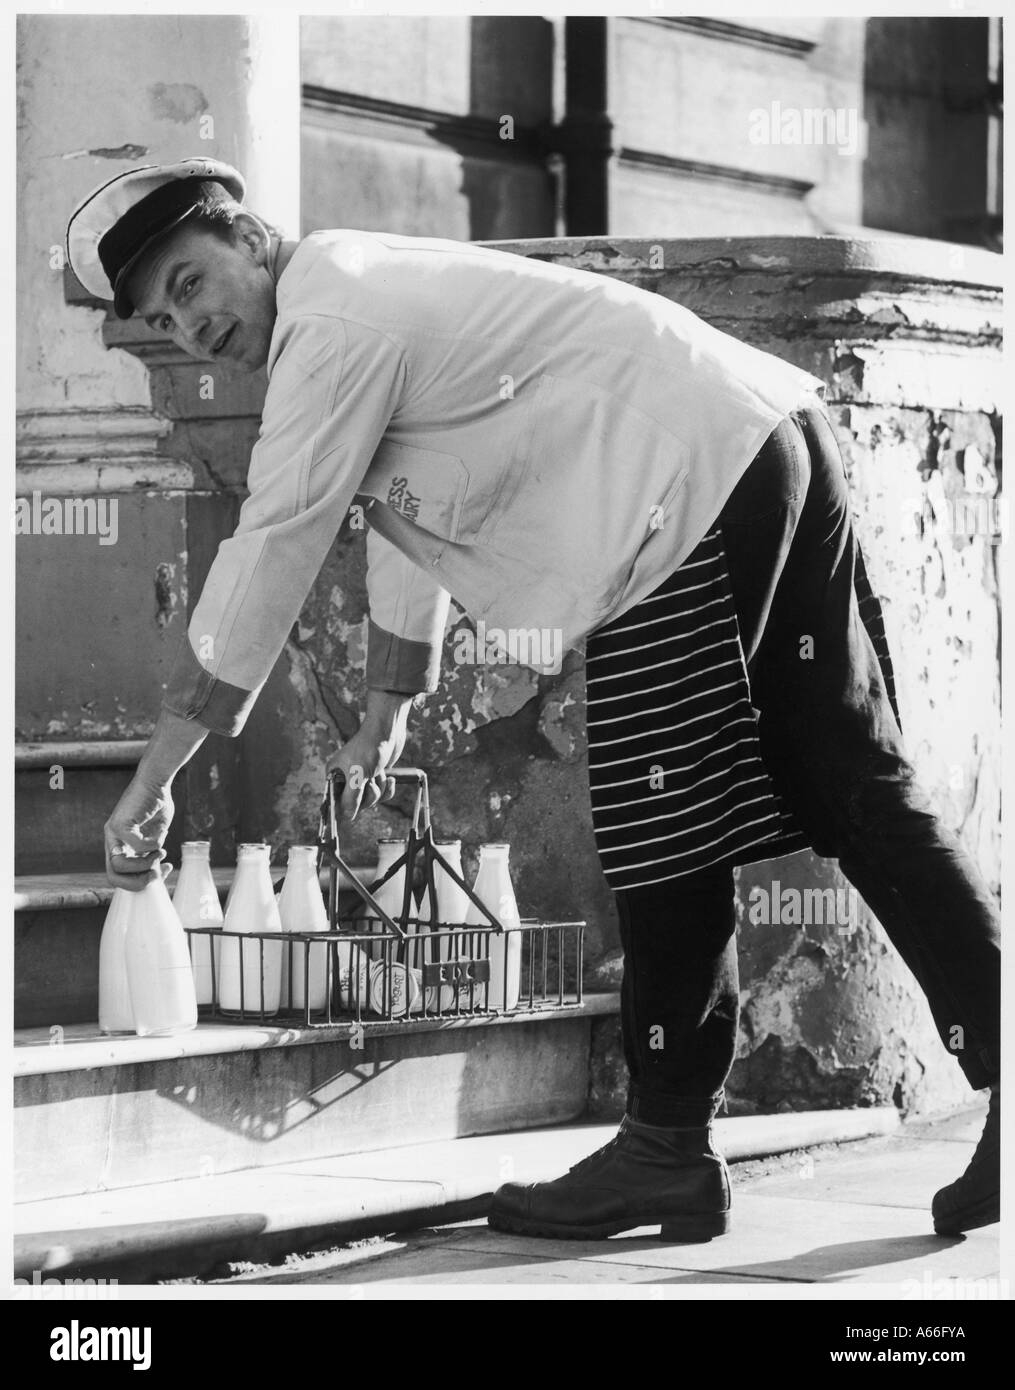 Milkman Making Delivery Stock Photo